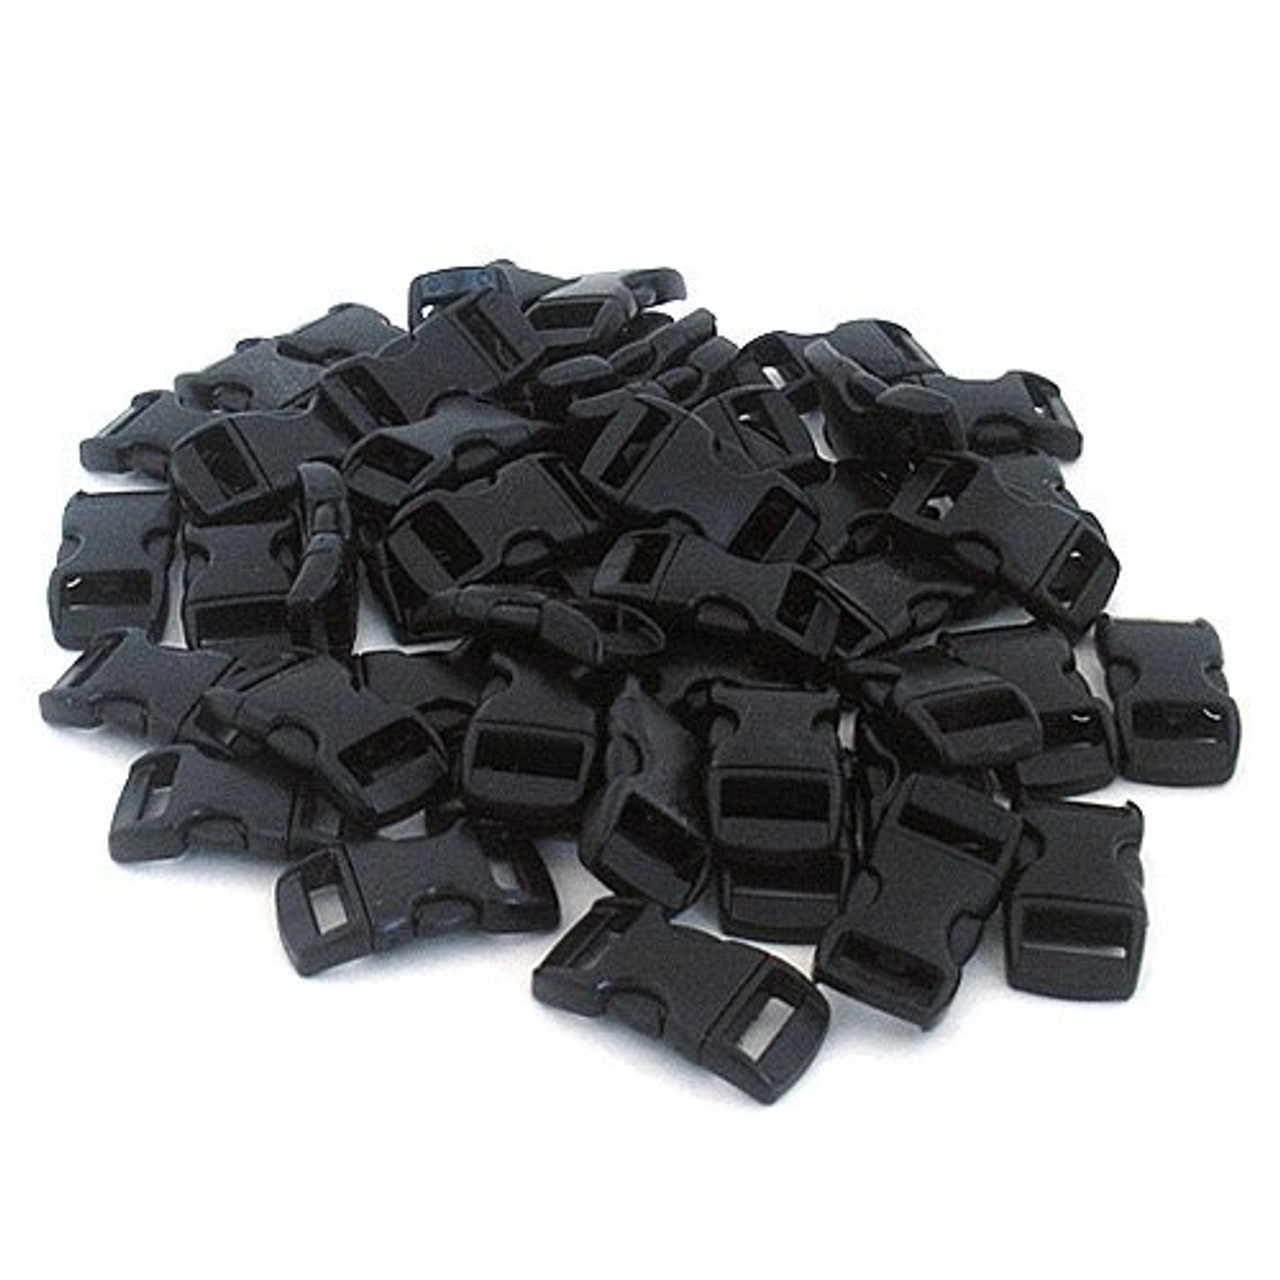 Paracord Planet 3/8 Inch Black Plastic Buckles - Curved Contoured Quick  Side Release Buckles